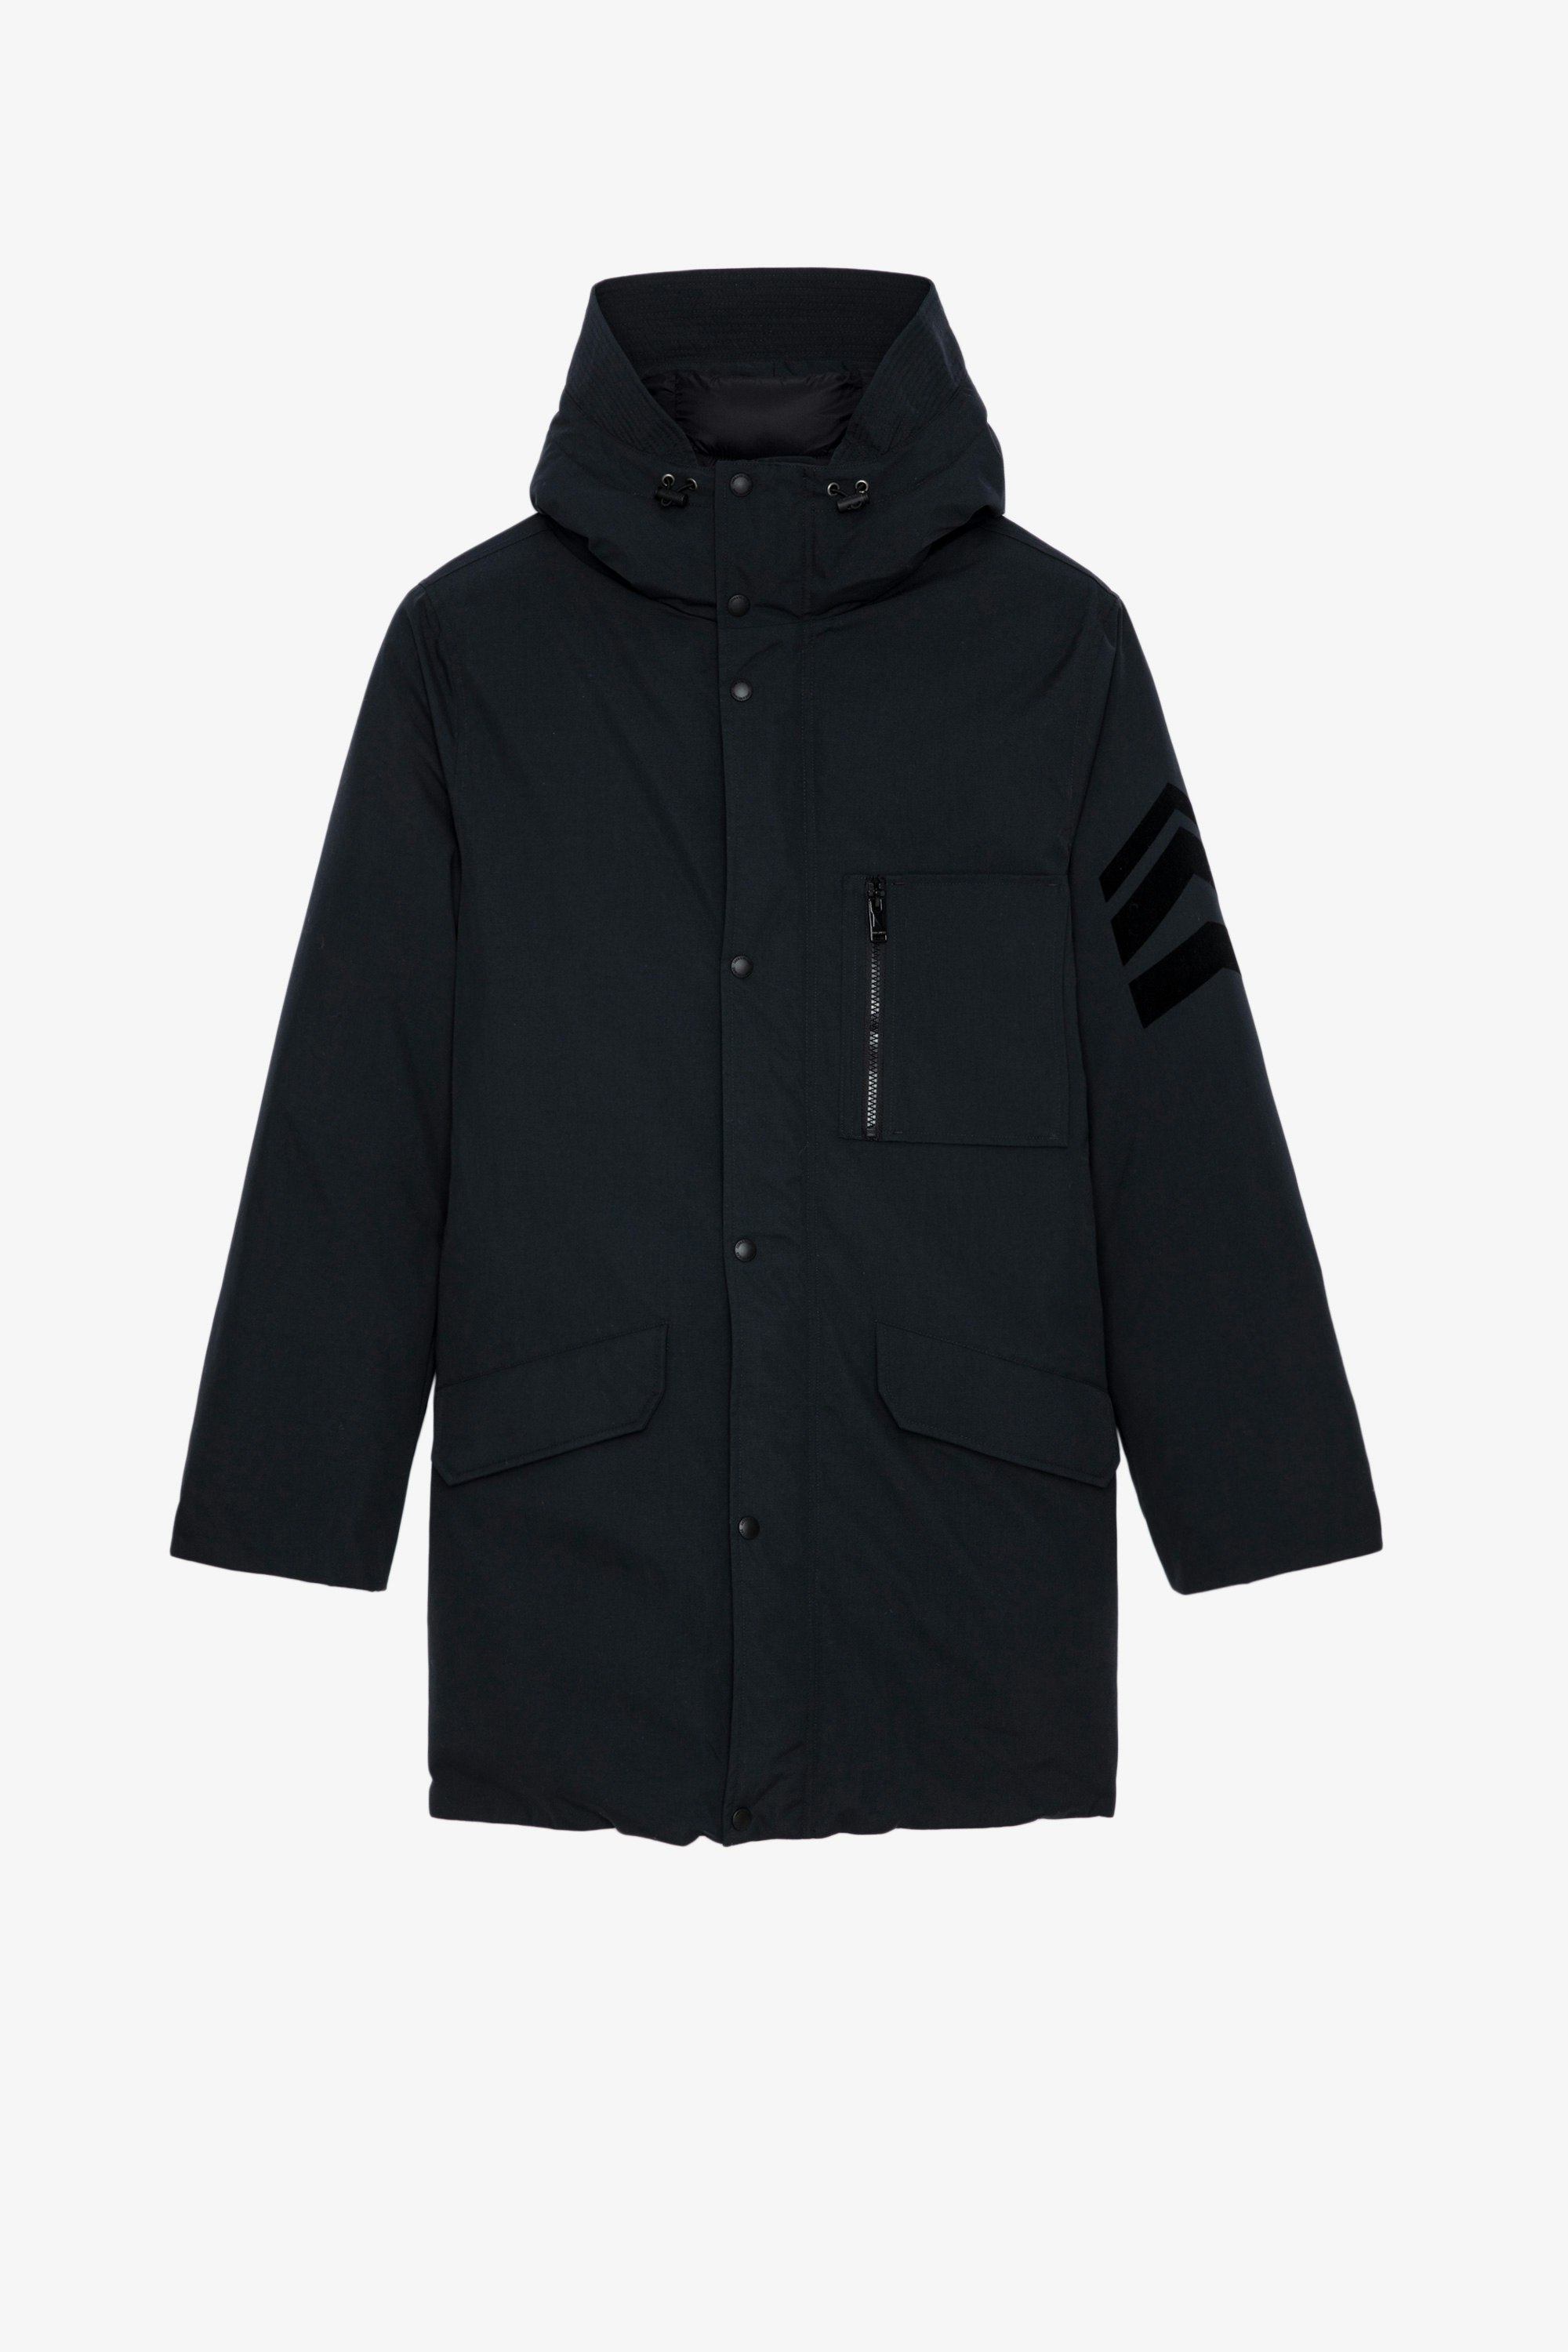 Kimmy Technical パーカー Men ‘s quilted technical parka in black nylon with oversized hood and arrows on the sleeve